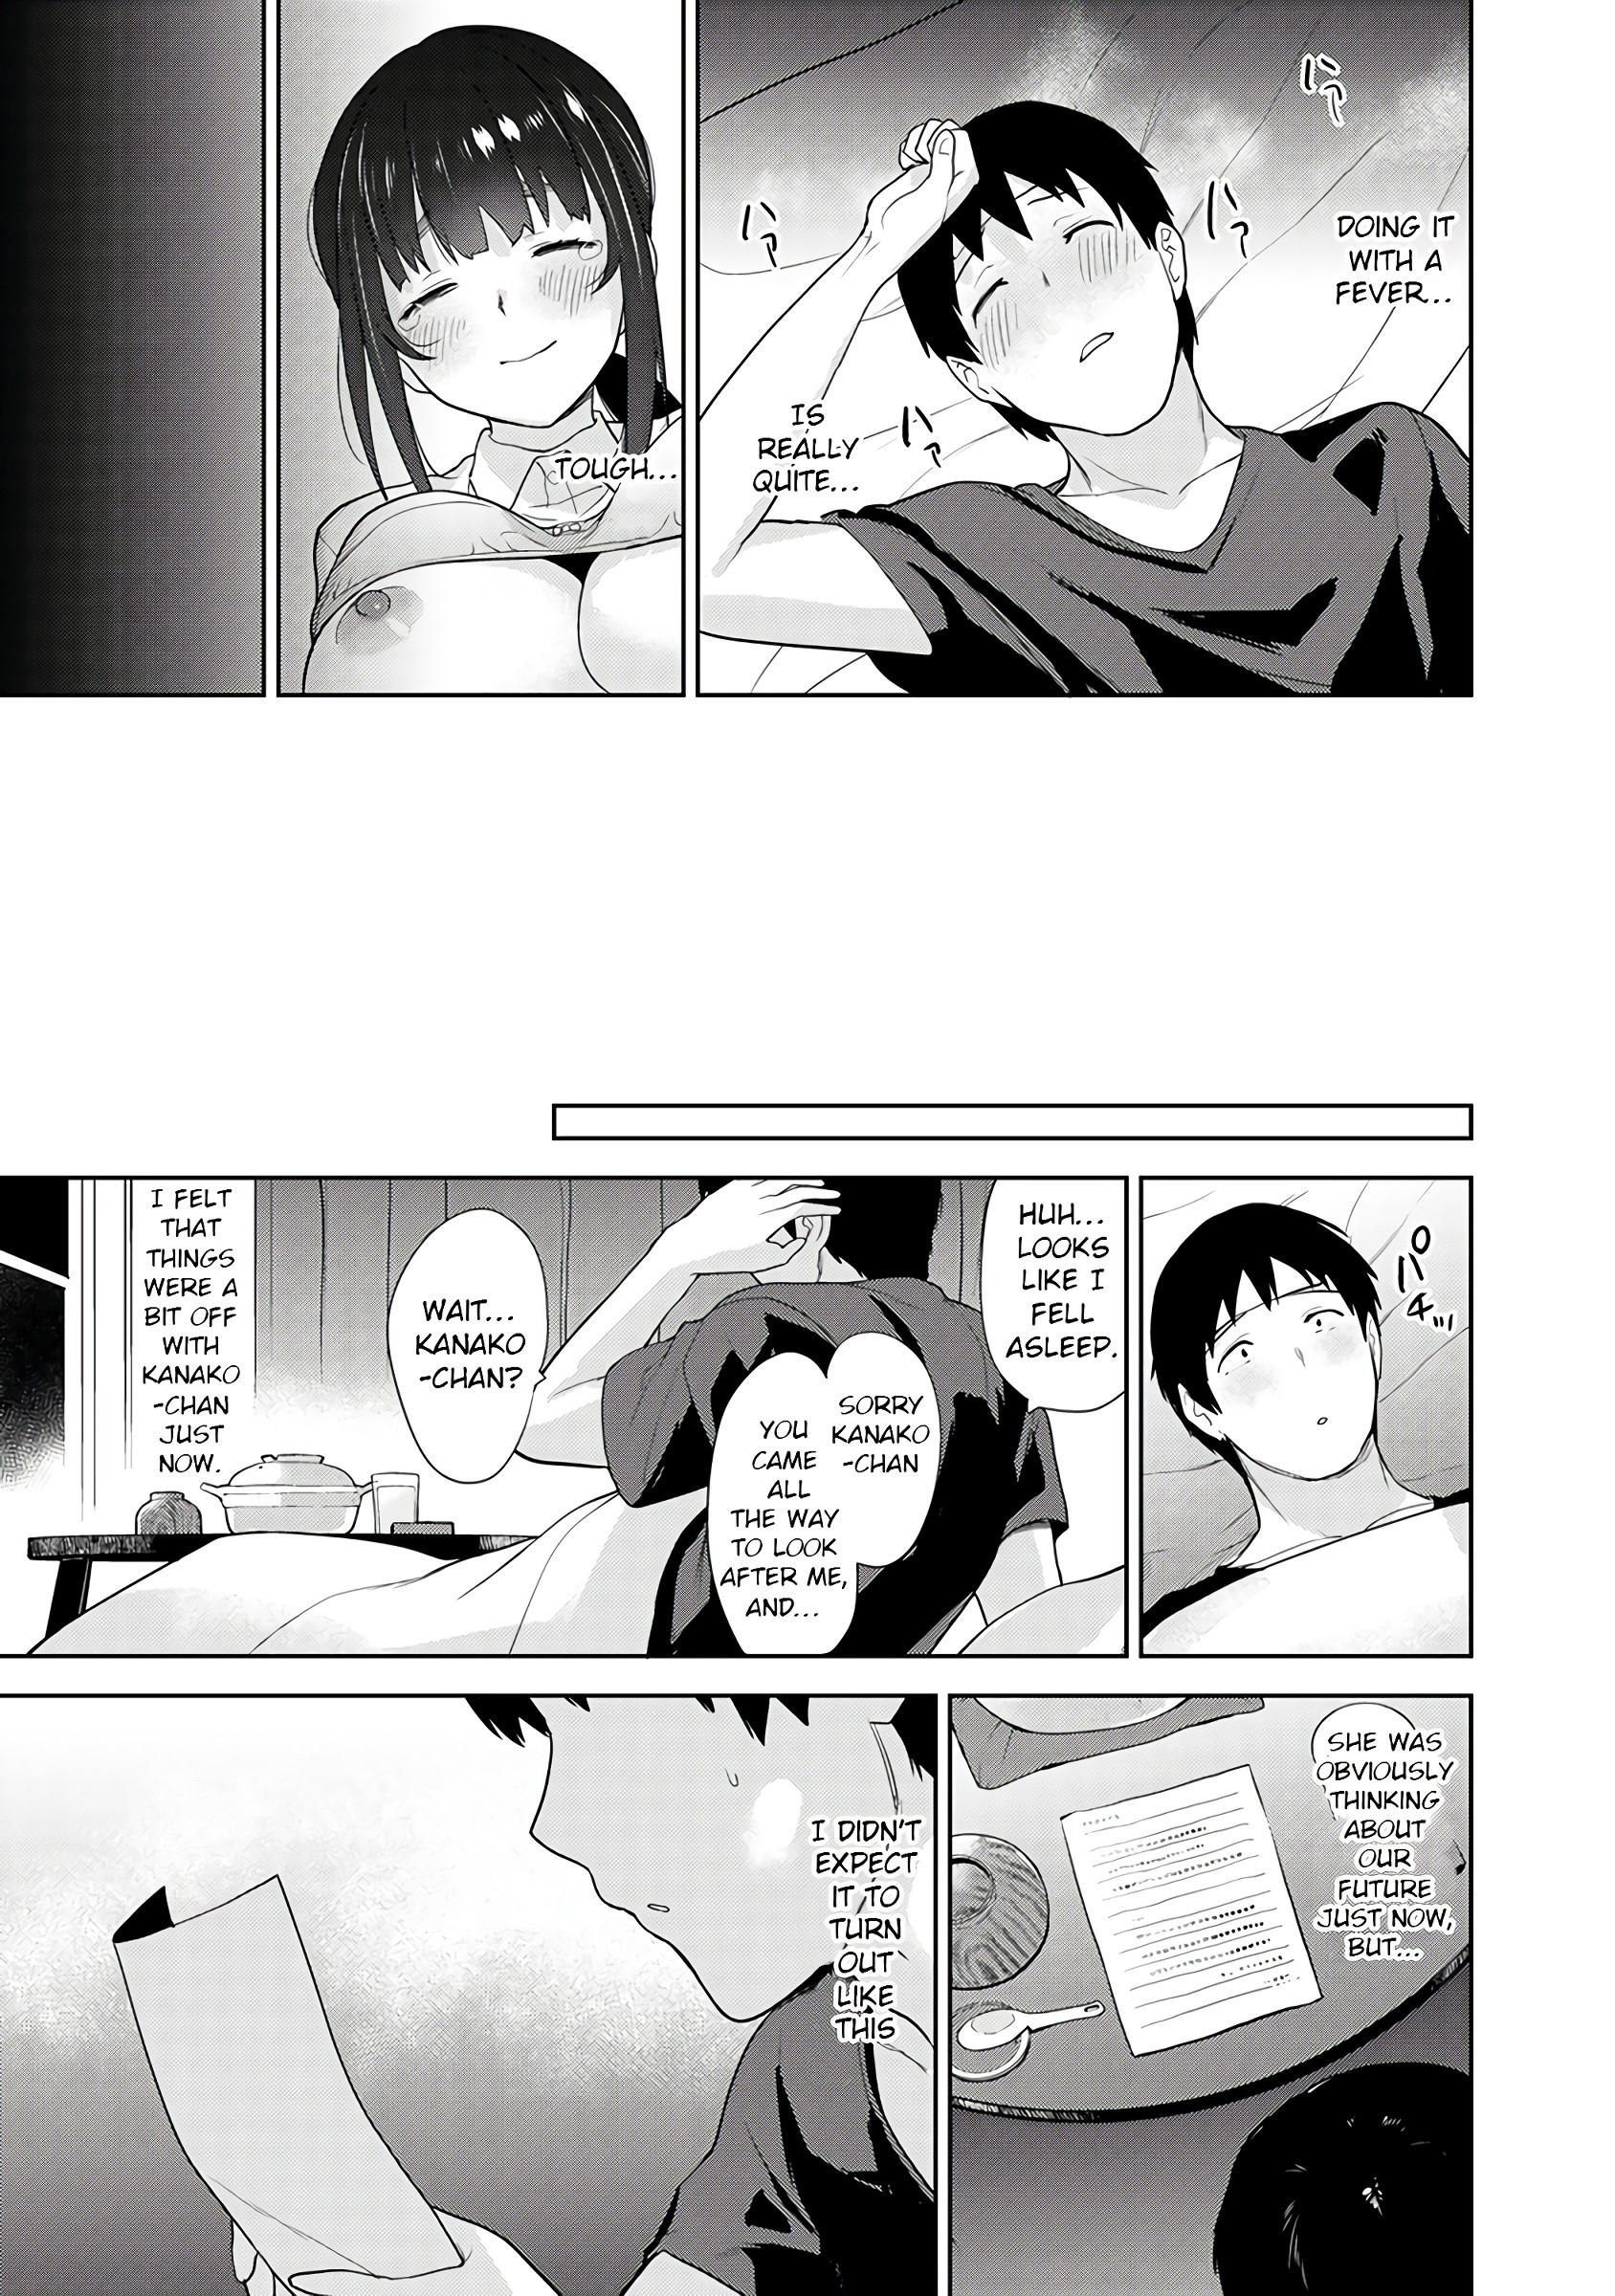 Method to Catch a Pretty Girl 9 hentai manga picture 25